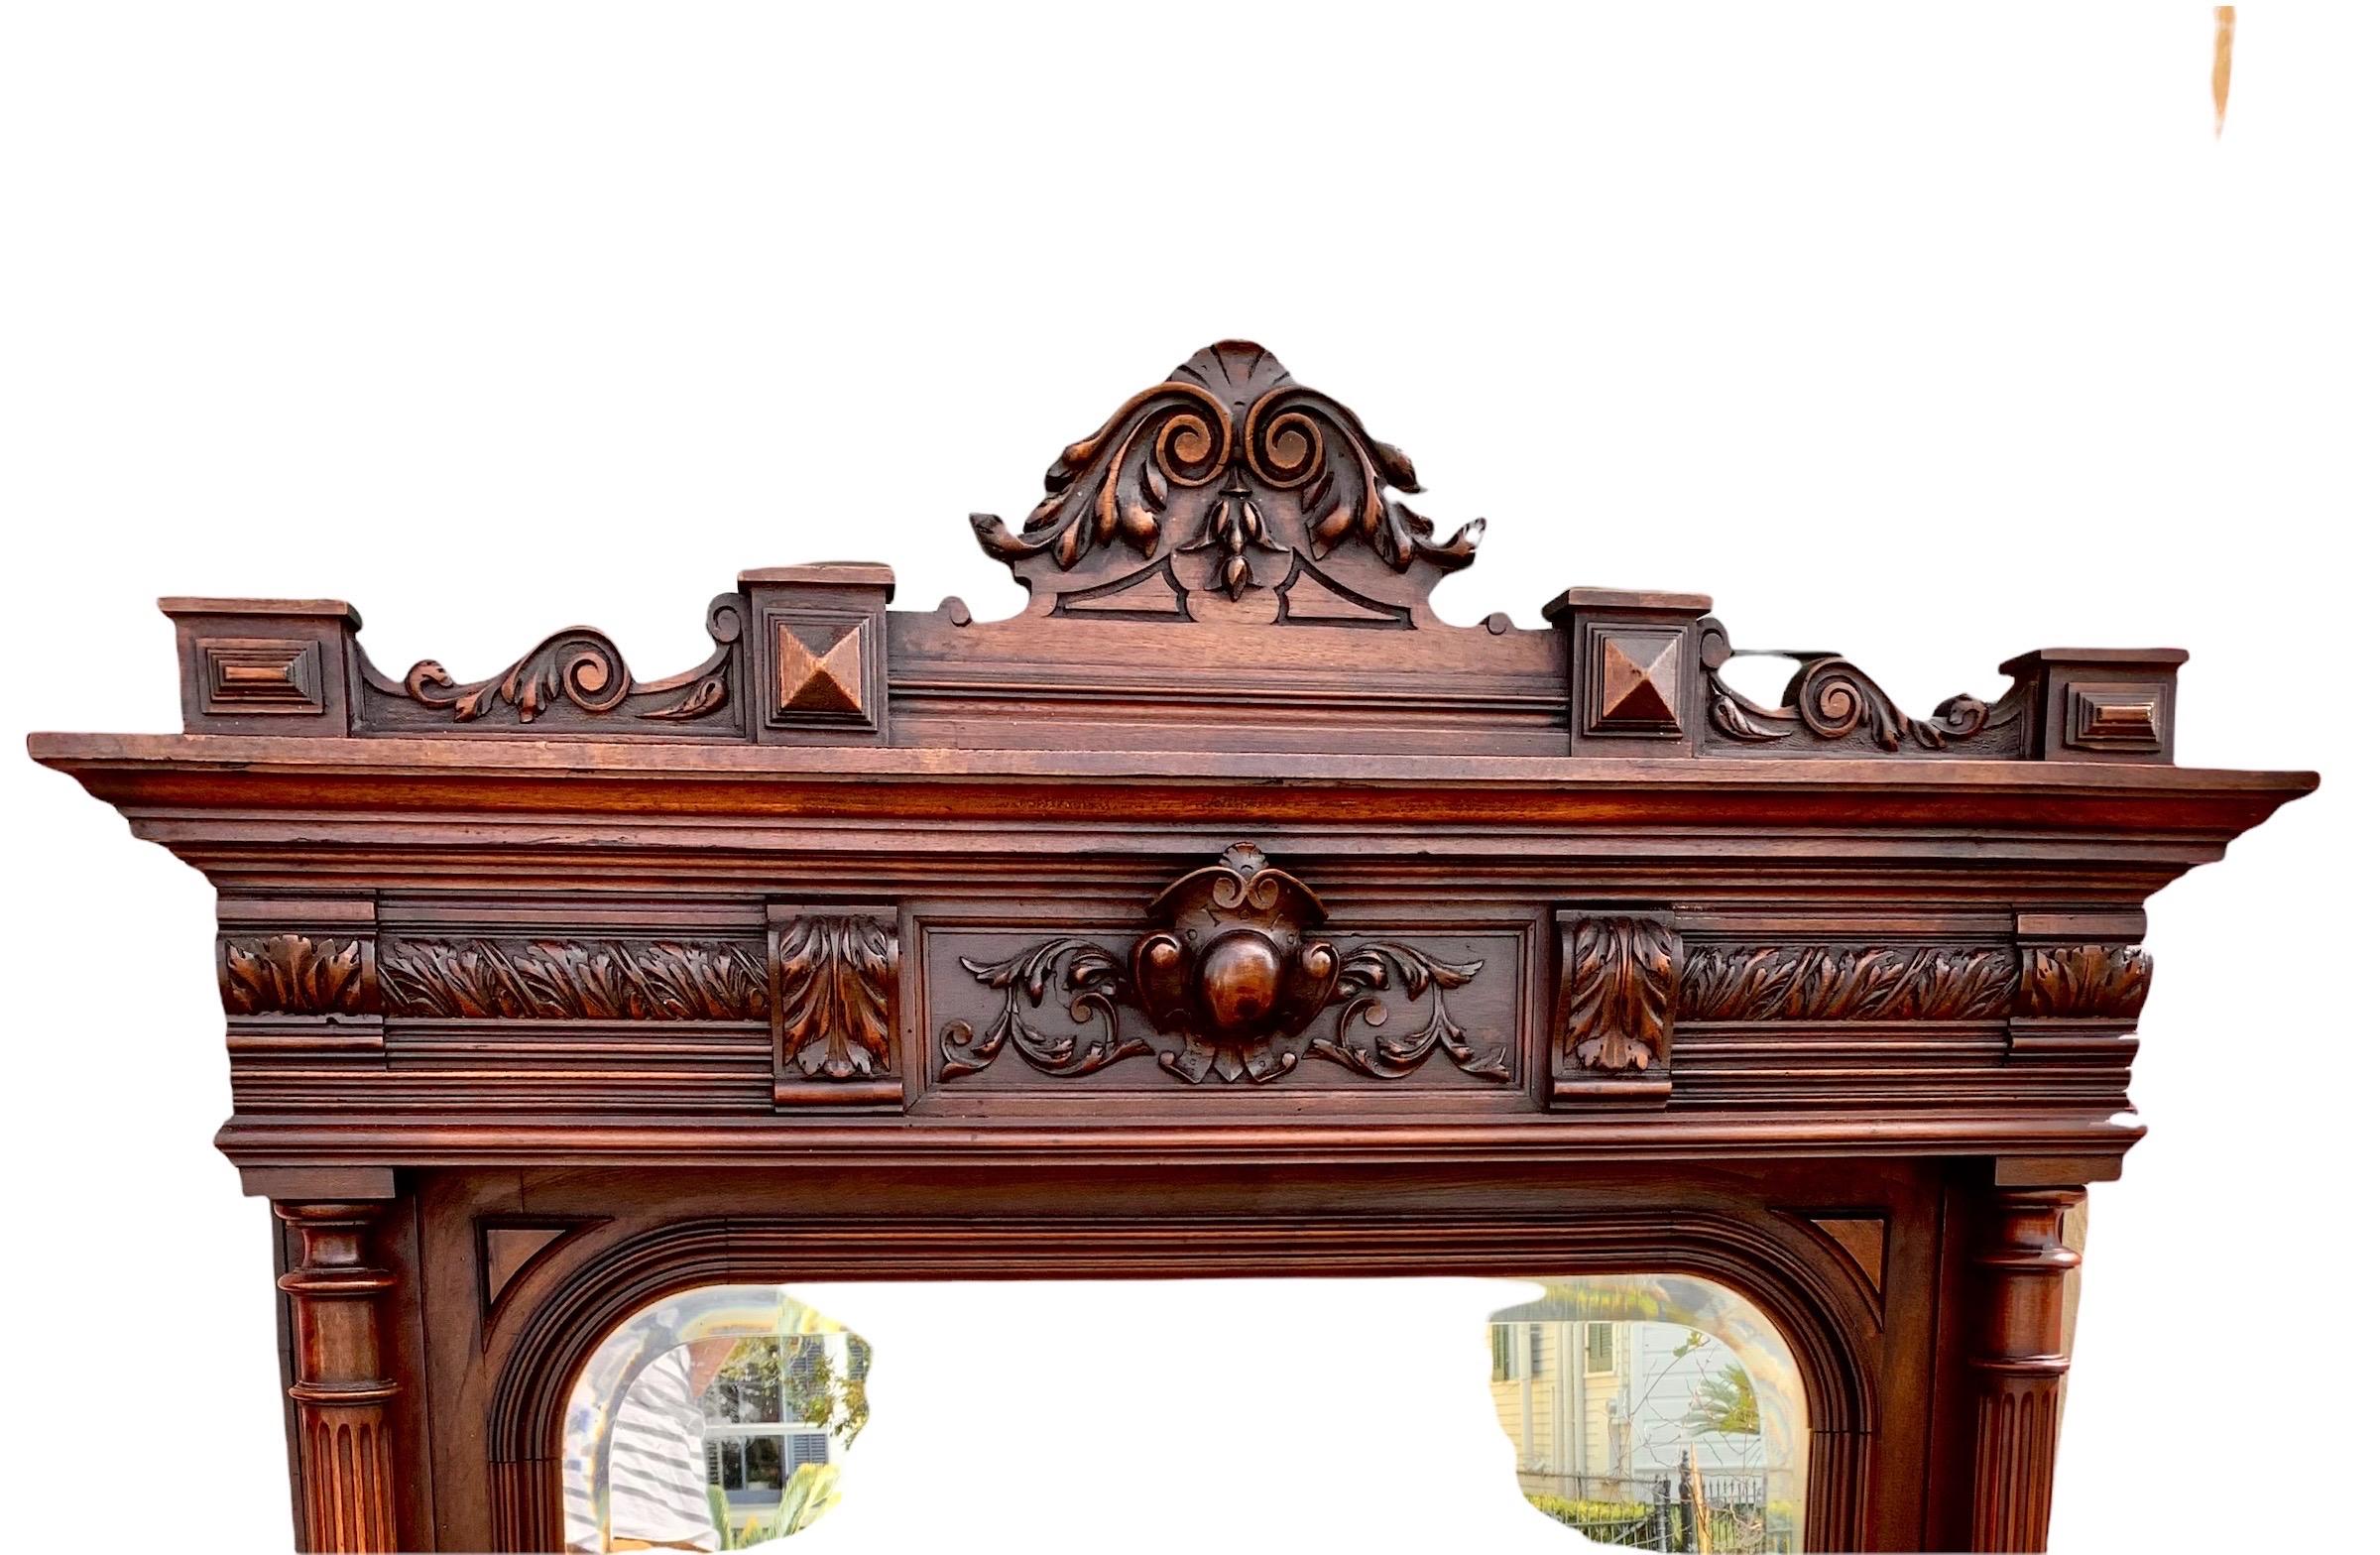 Antique French Renaissance Revival hand carved walnut over mantle mirror with a stunning, original double beveled shaped mirror plate, flanked by fluted columns, the crown having a center carved cartouche and scrolled elements.

This lovely mirror